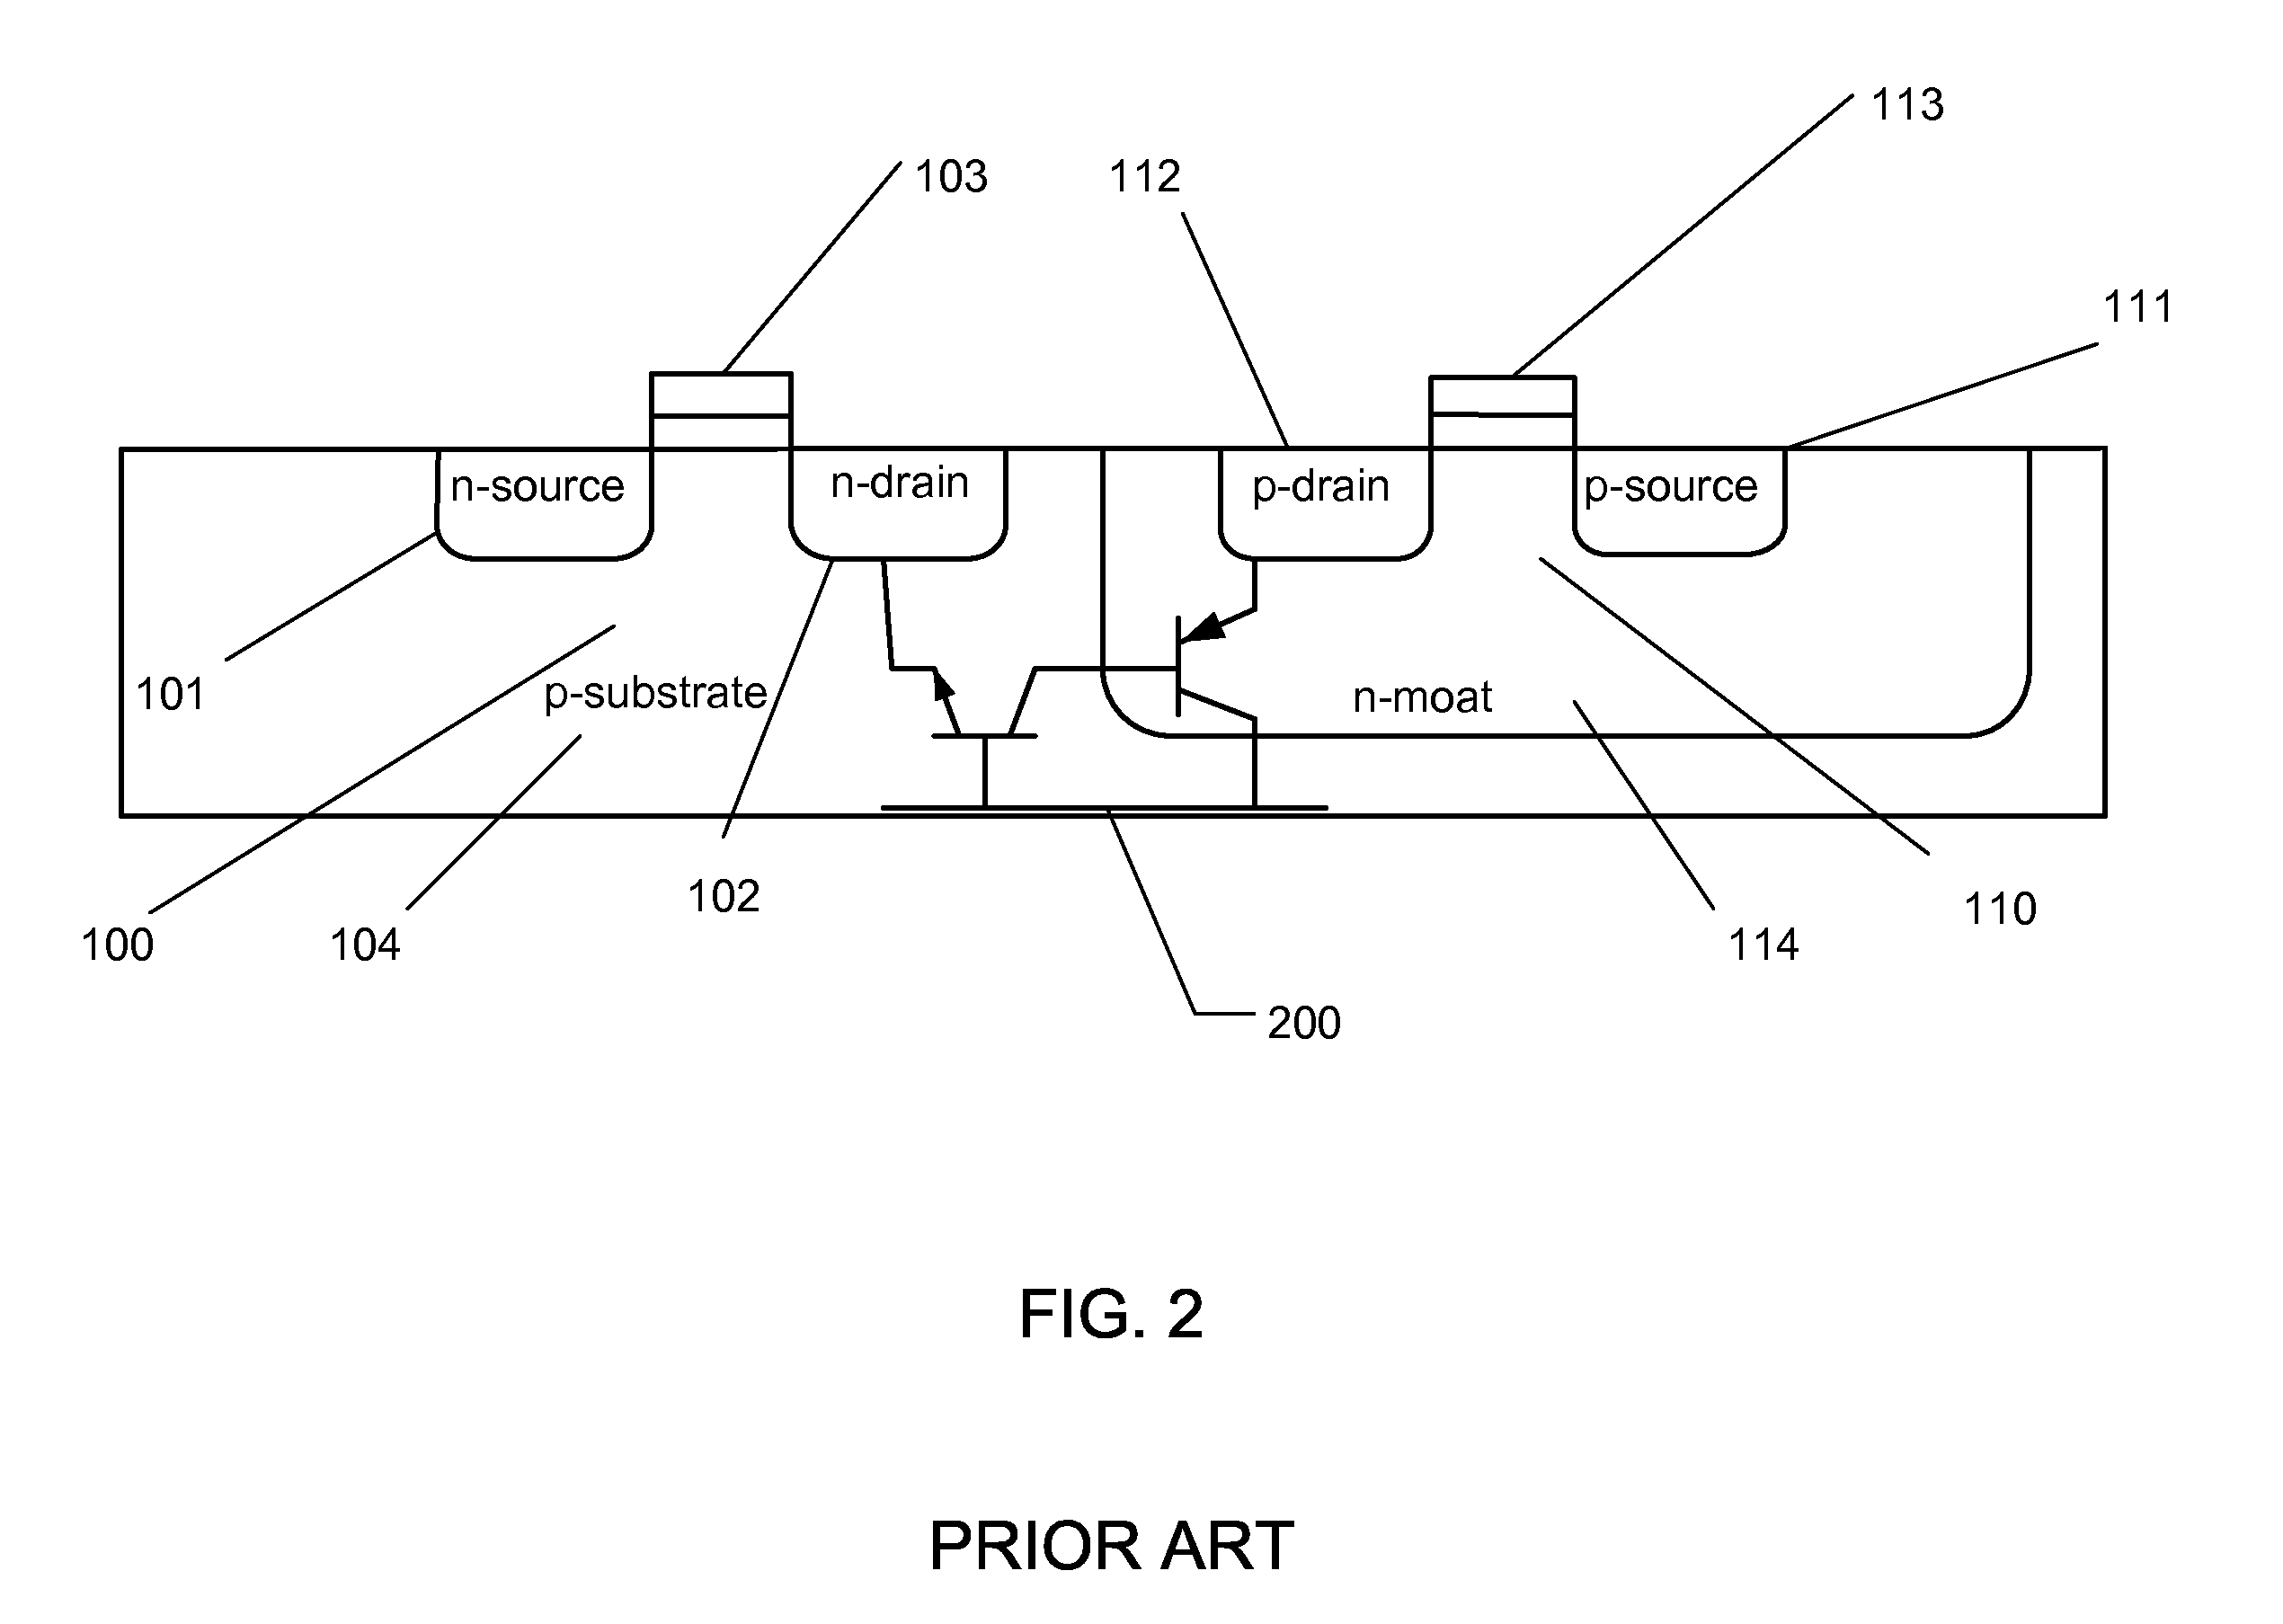 Gamma and temperature hardened pharmaceutical devices